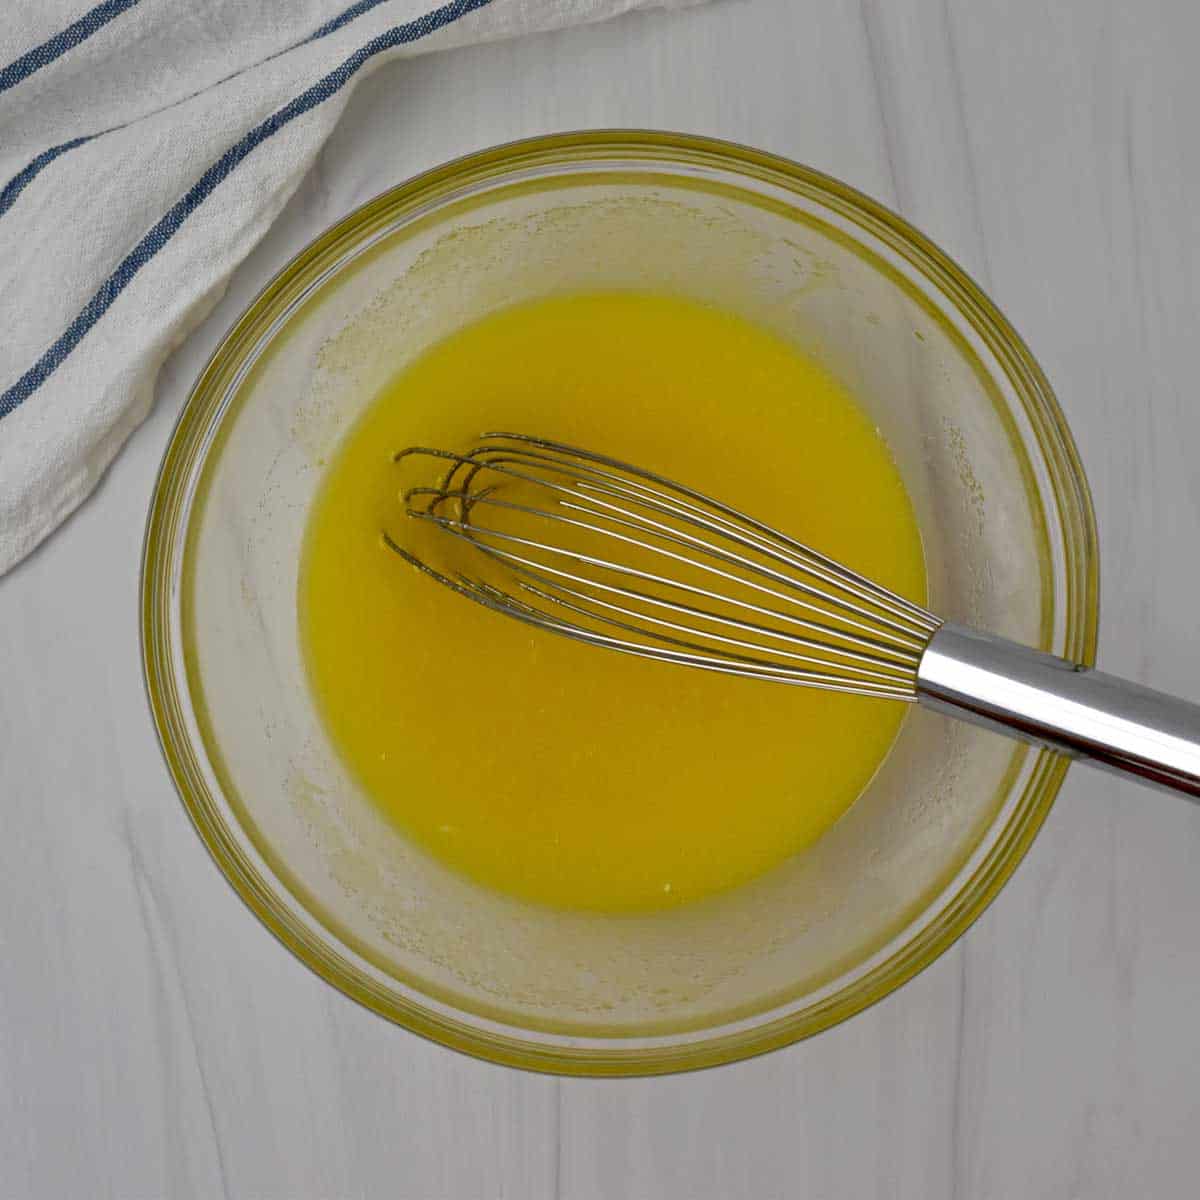 Sugar, vegetable oil, and eggs whisked together in glass mixing bowl.